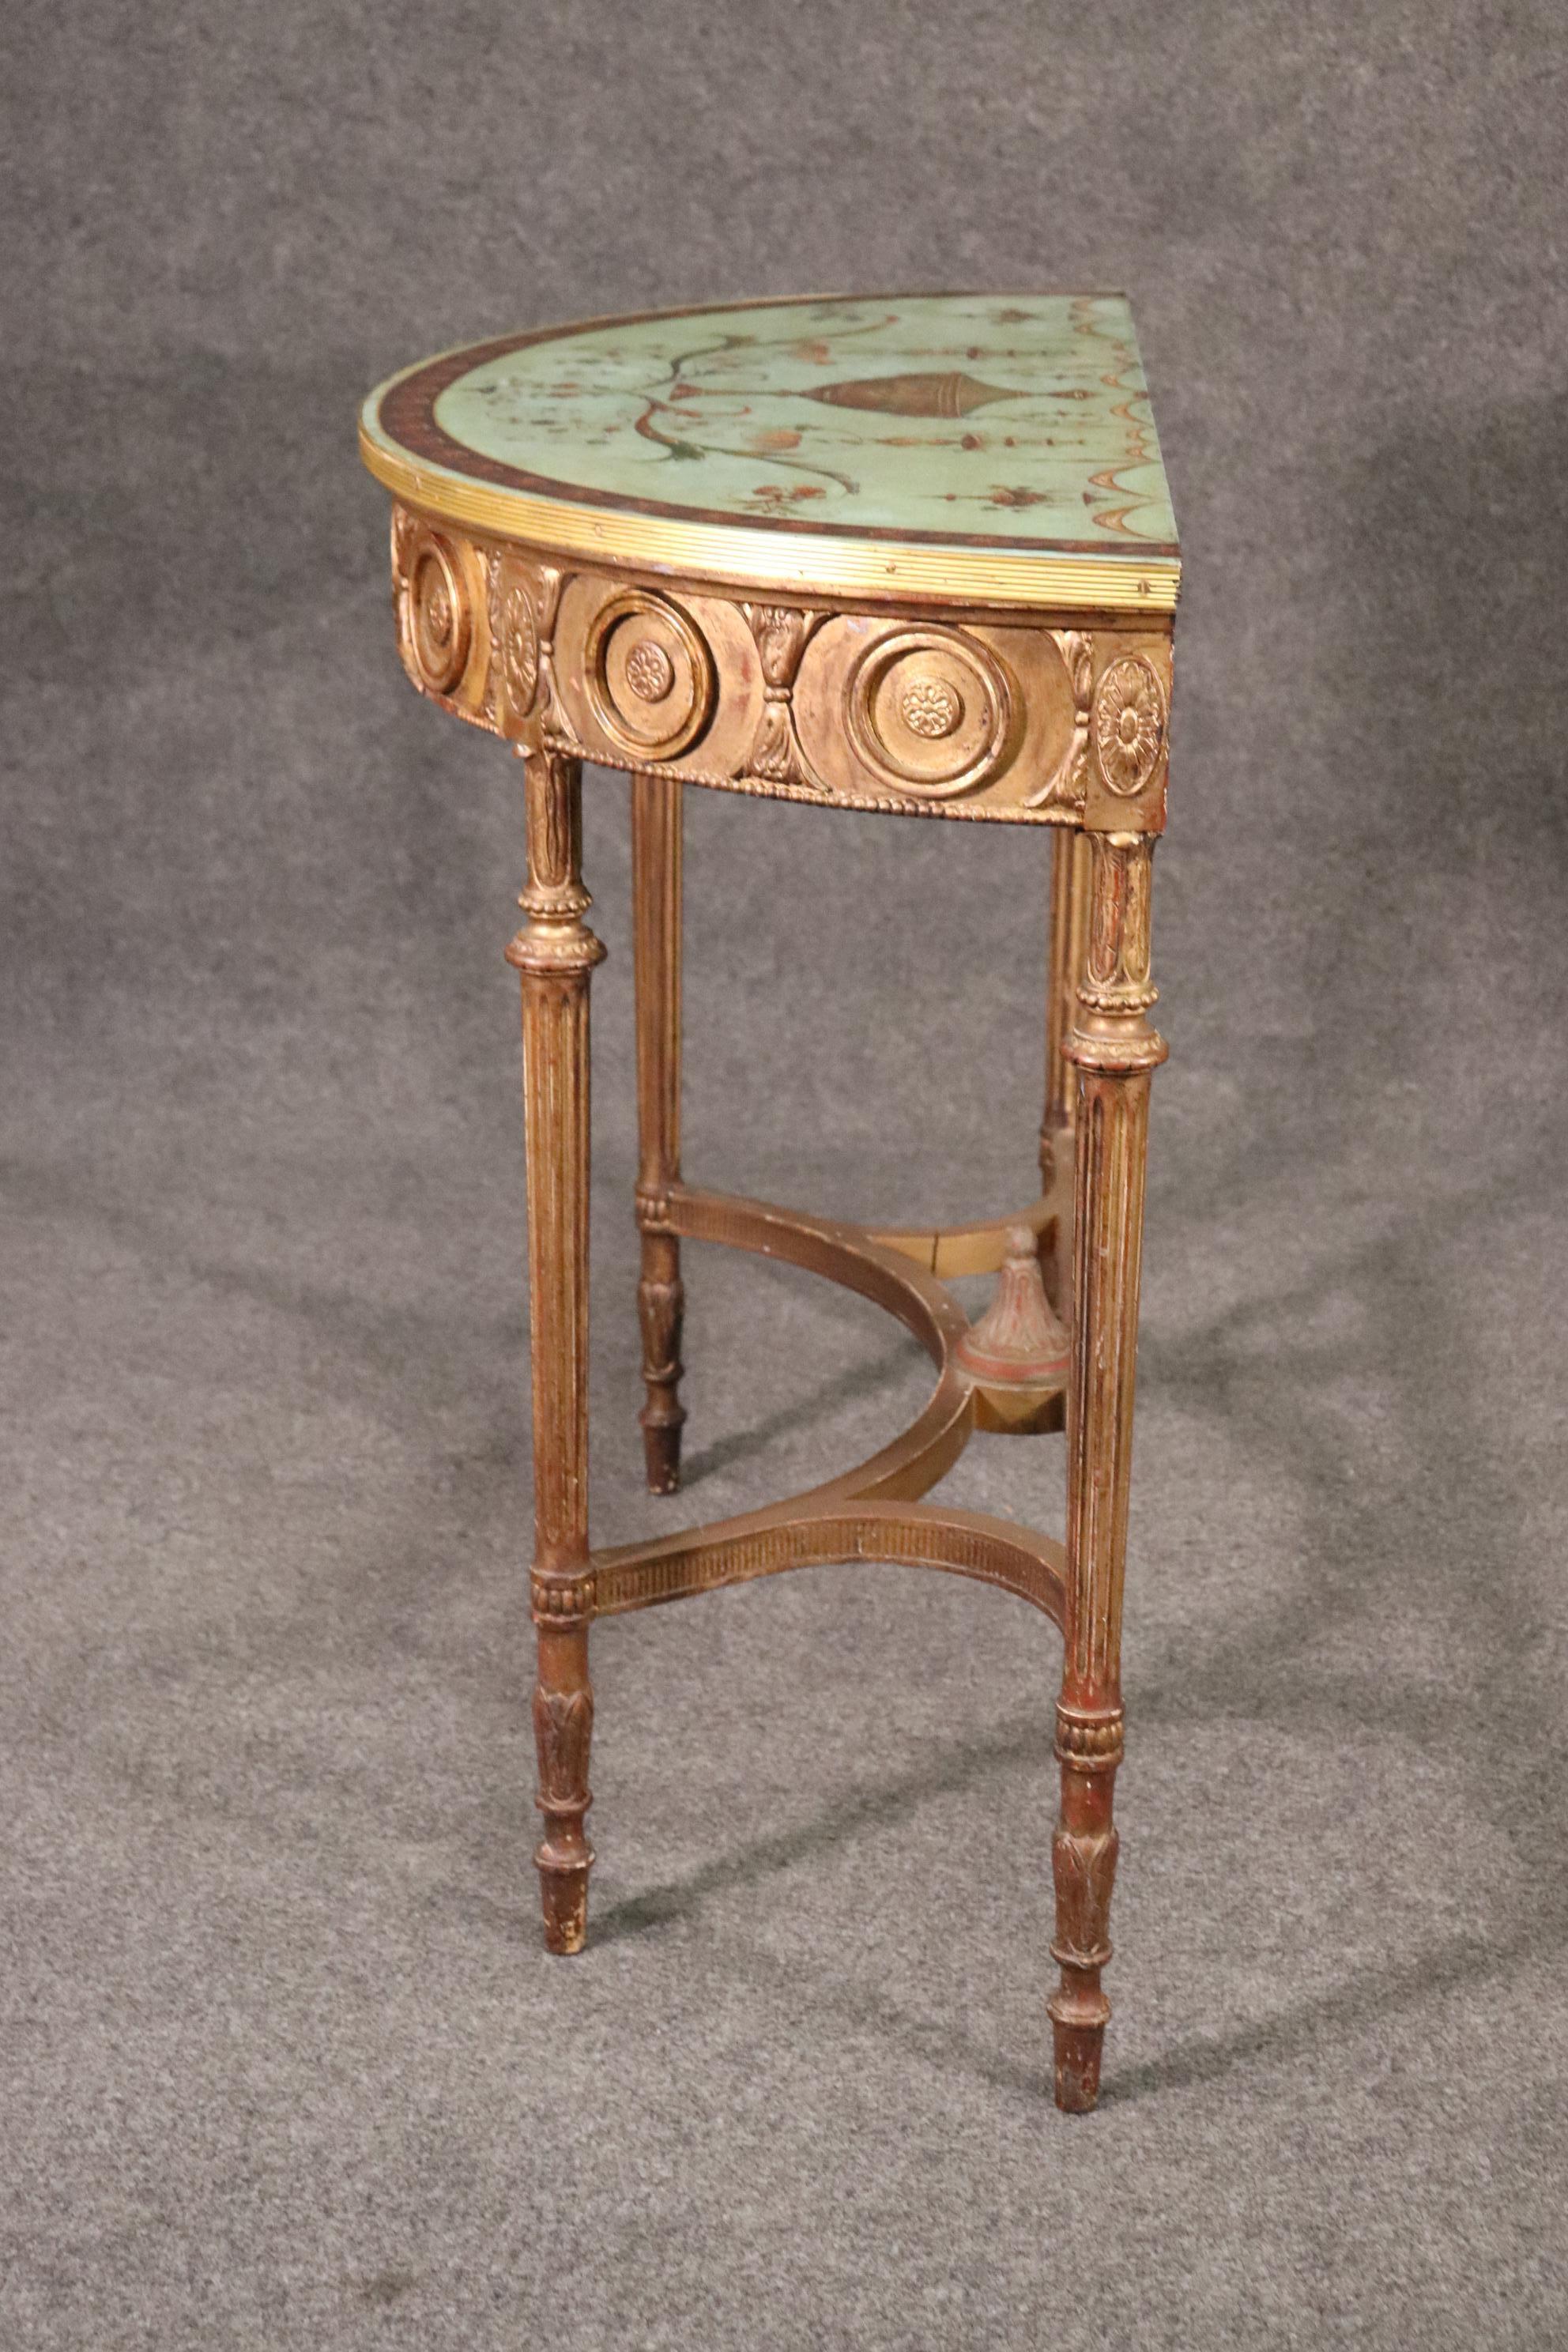 Walnut Fine Quality Paint Decorated Gilded Adams Demilune Console Table, Circa 1890 For Sale